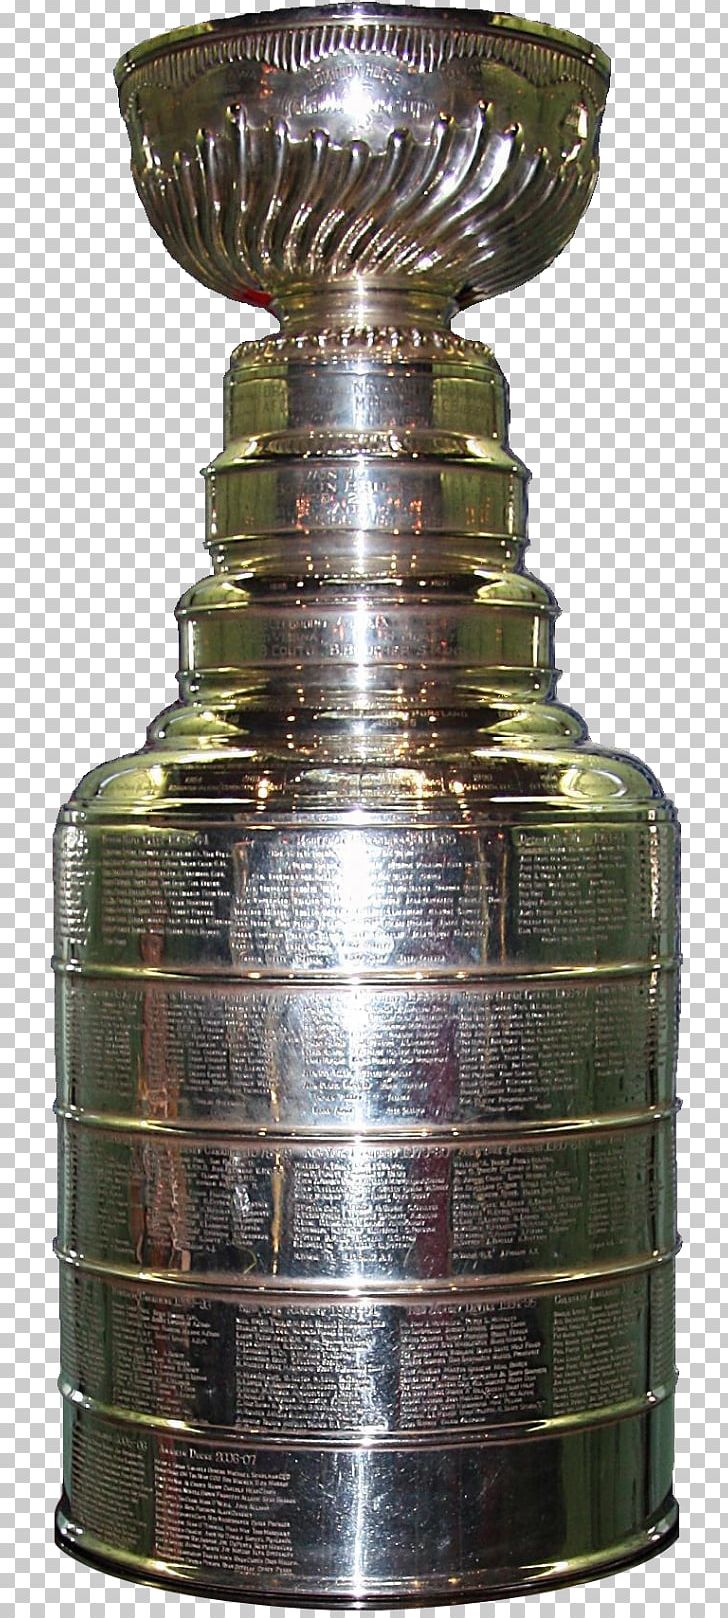 National Hockey League Stanley Cup Playoffs 2013 Stanley Cup Finals Chicago Blackhawks PNG, Clipart, 2013 Stanley Cup Finals, Brass, Conn Smythe Trophy, Cup, Hockey Hall Of Fame Free PNG Download